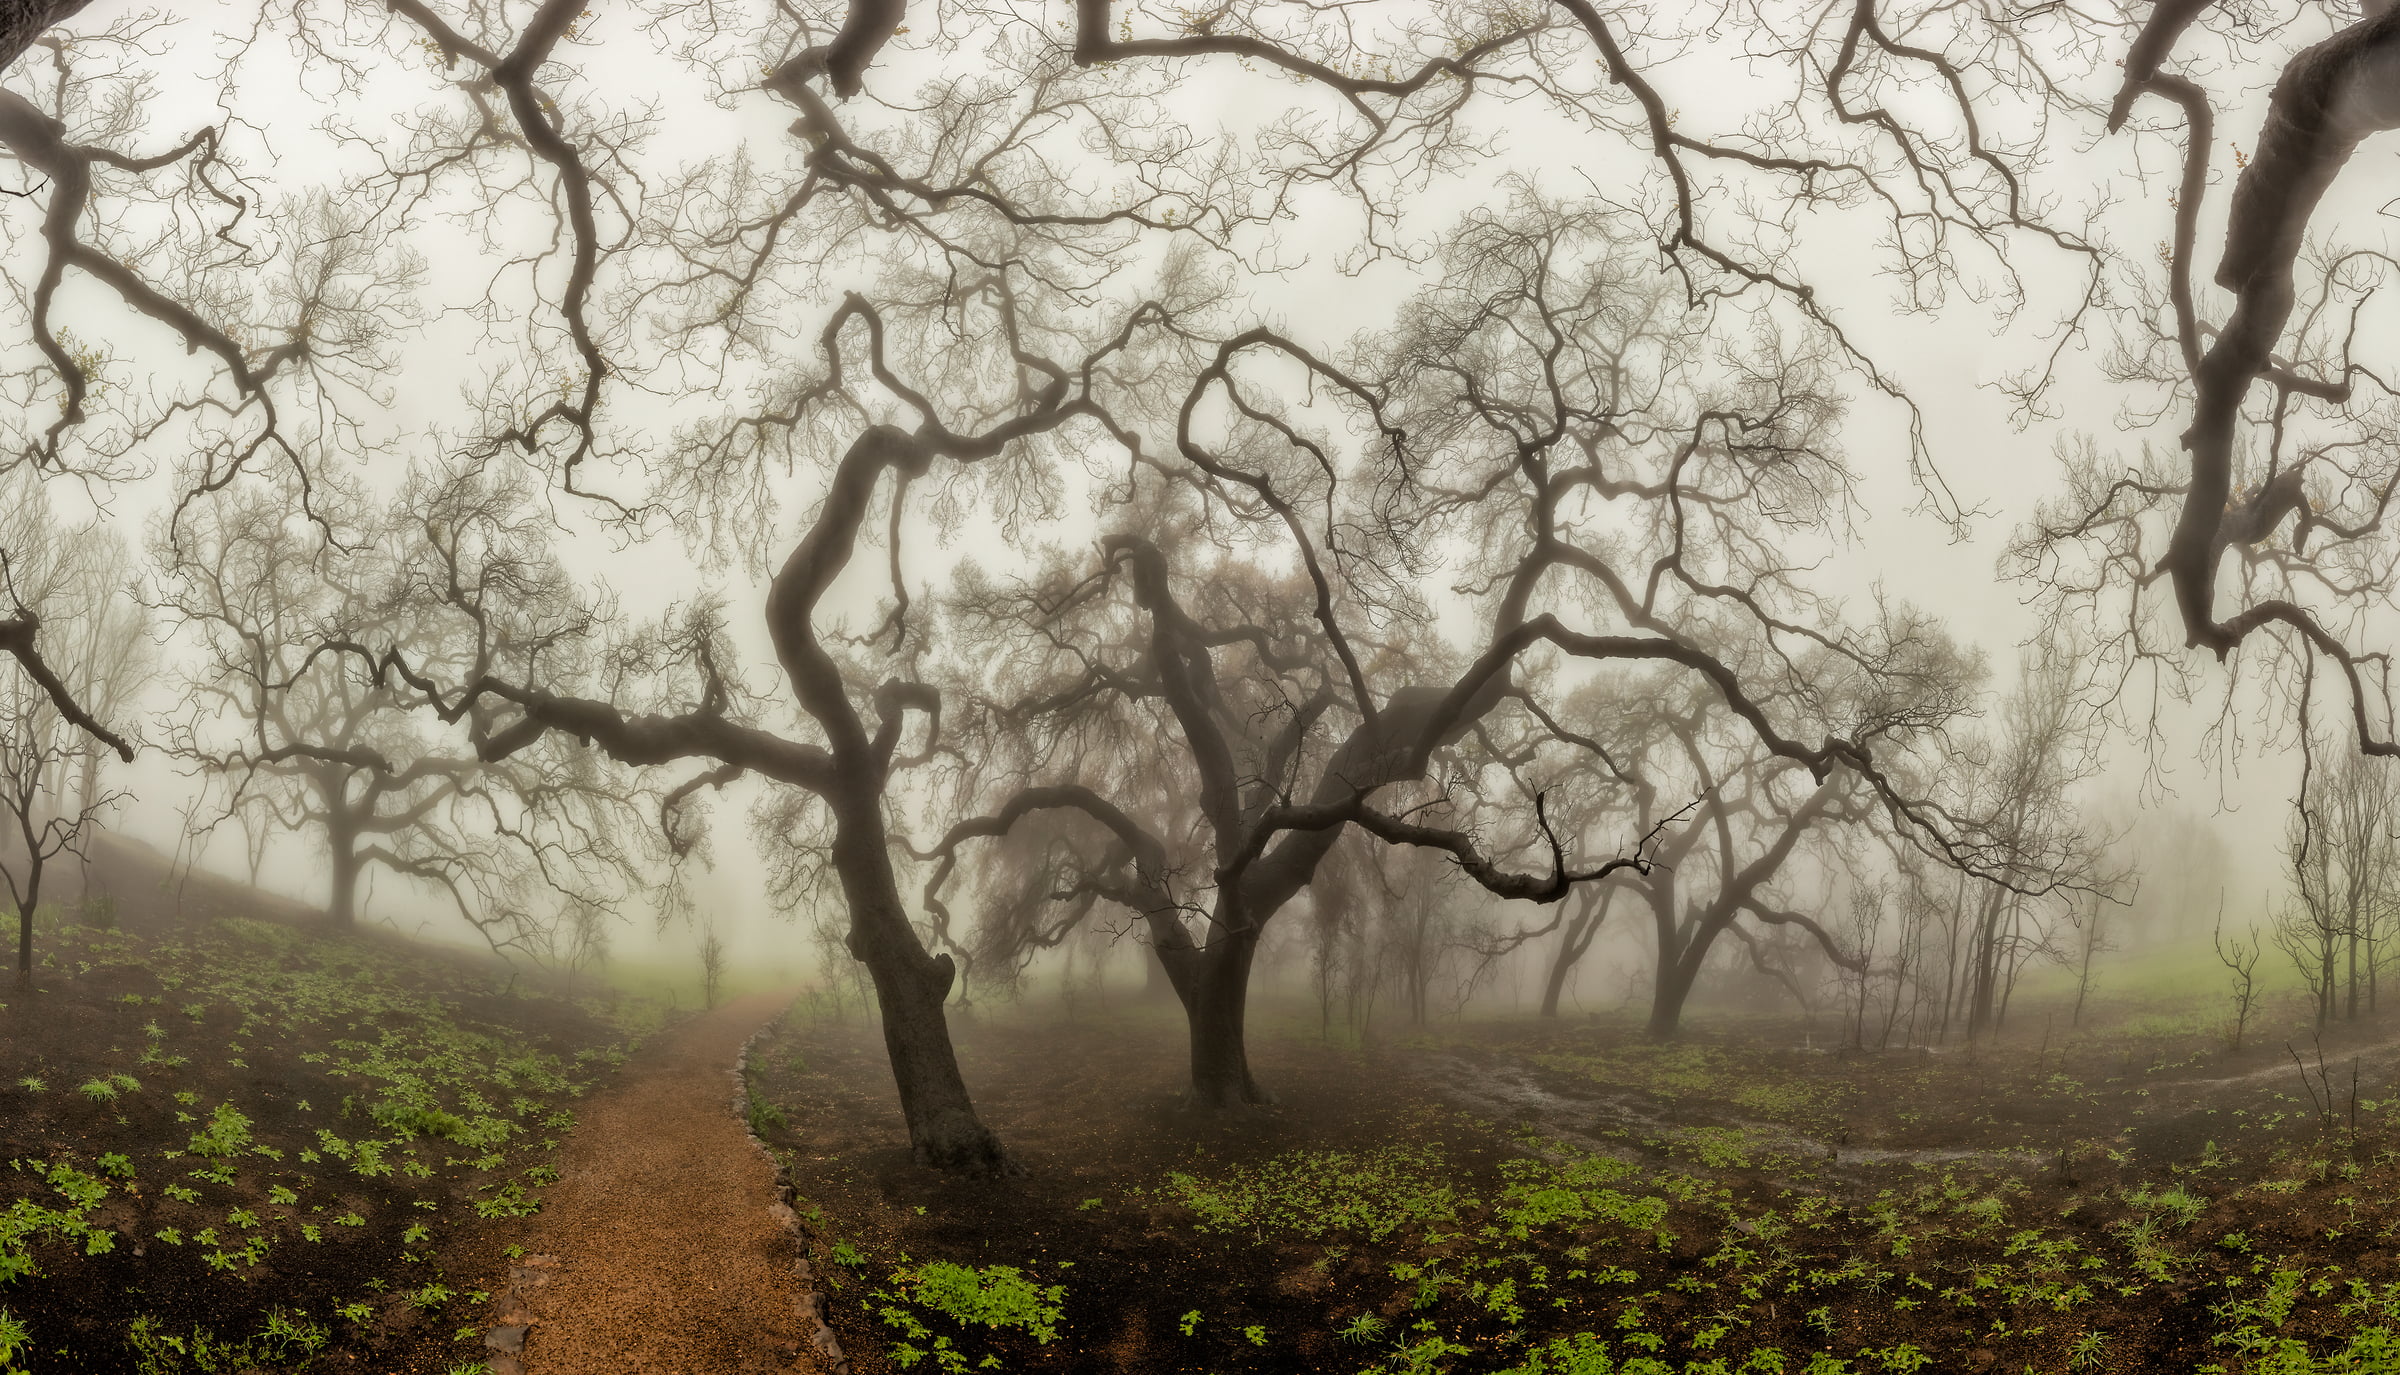 512 megapixels! A very high resolution, large-format VAST photo print of a creepy forest; photograph created by Peter Rodger in Nicolas Ridge, Malibu, California.